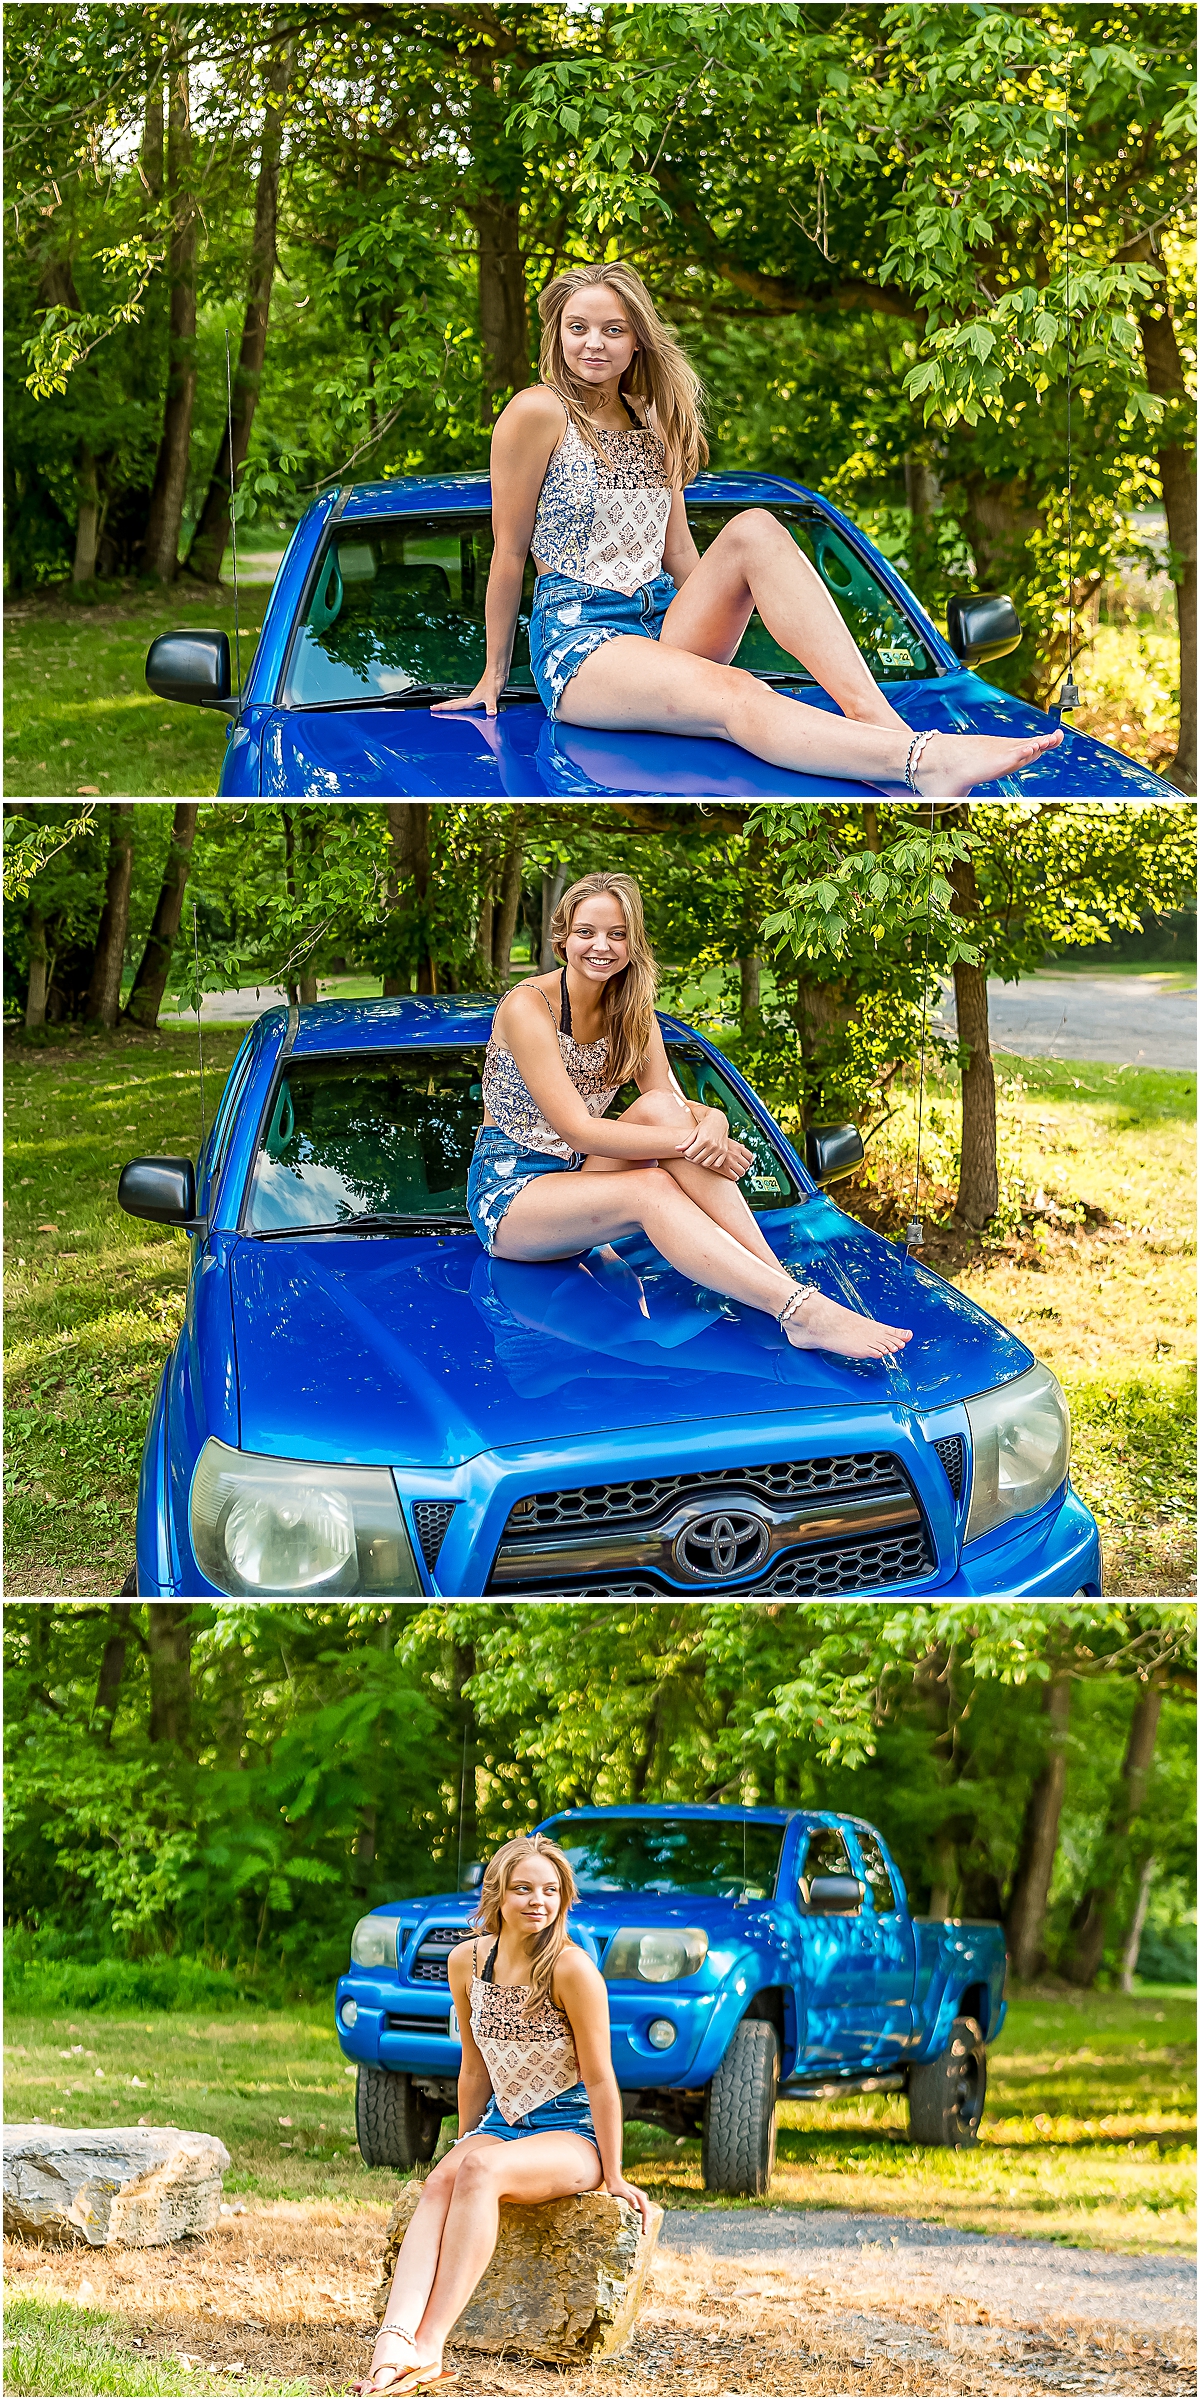 Series of Brooke on and in front of her Toyota truck